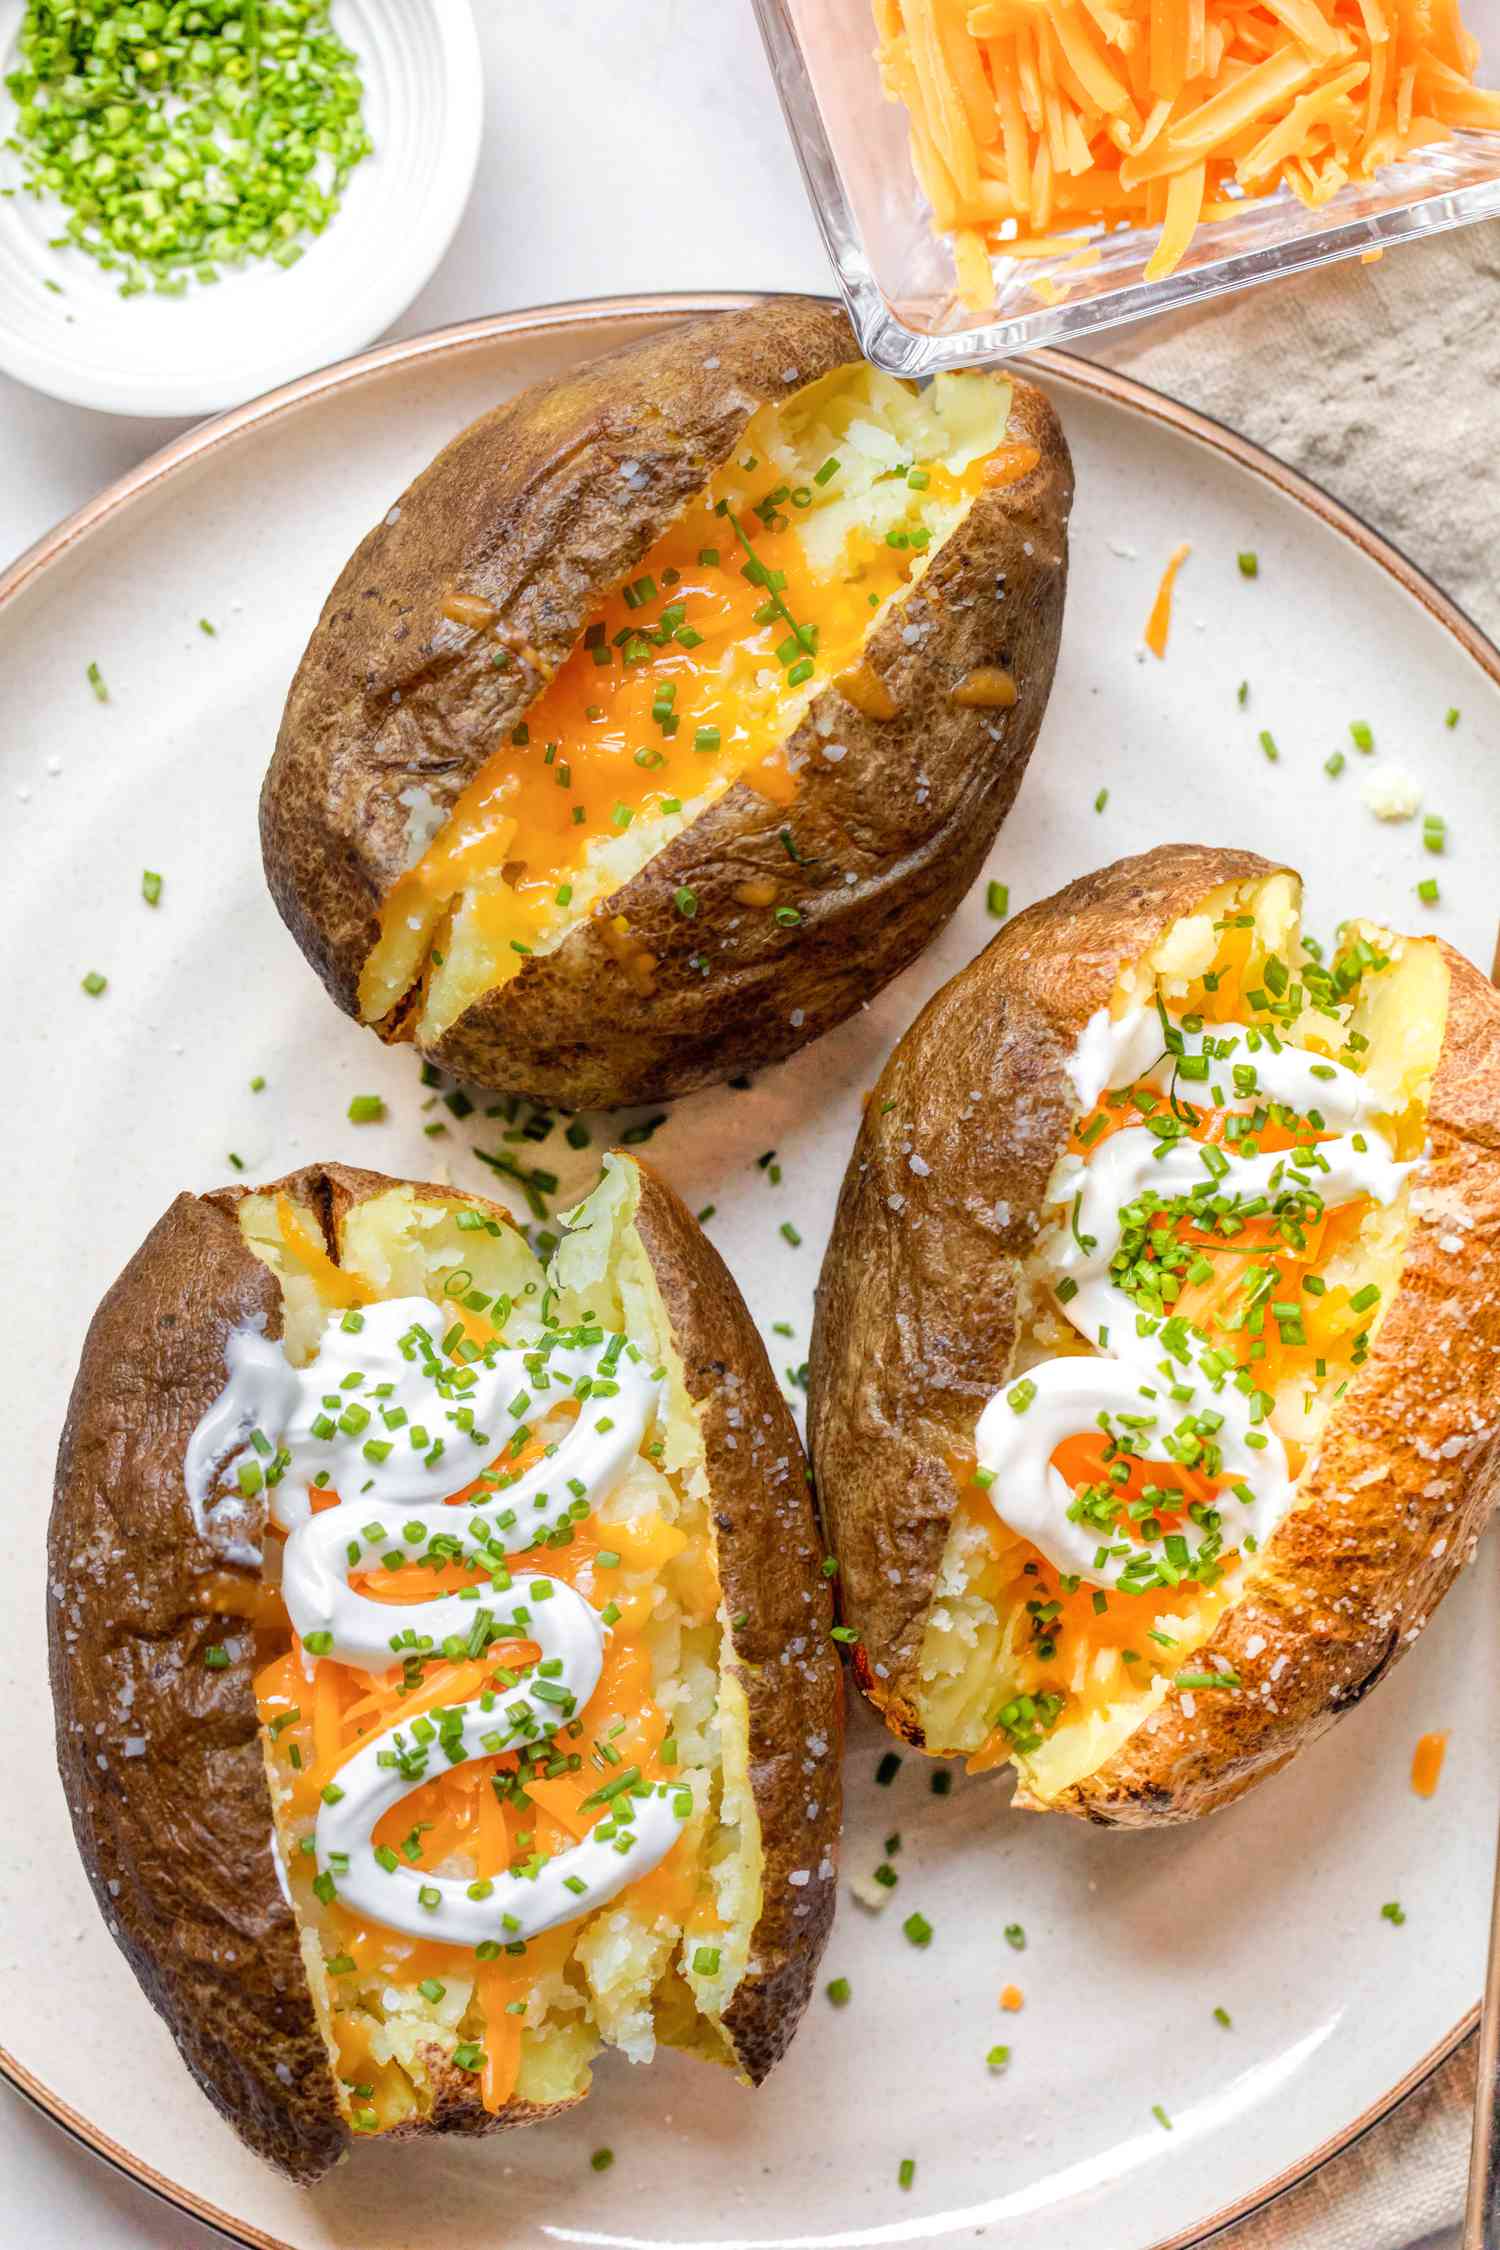 Microwave Baked Potato Recipe: Quick, Easy, and Delicious